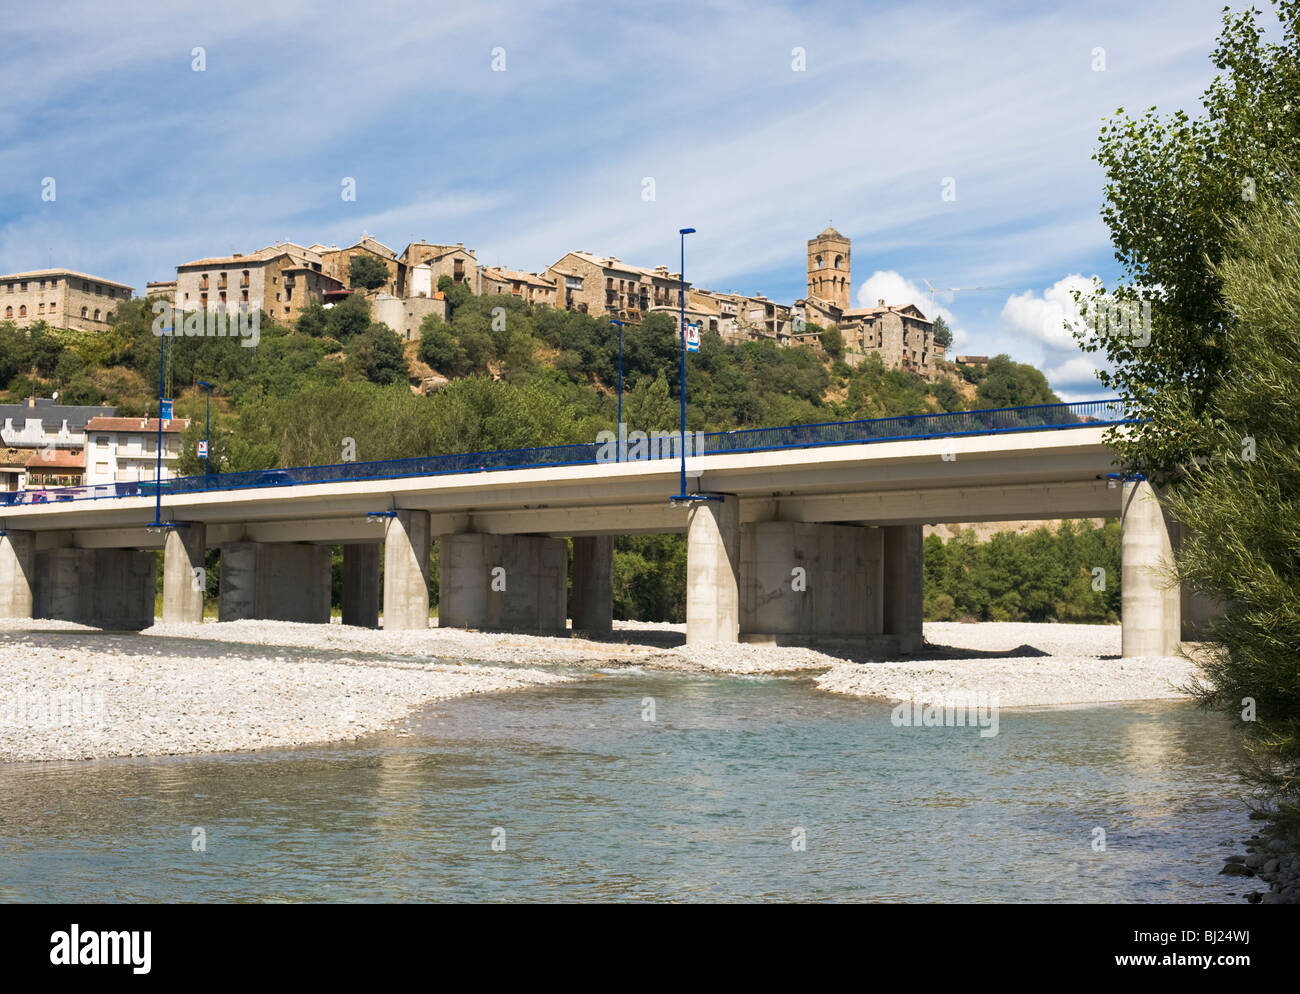 Bridge over Rio Cinca in the town of Ainsa, Huesca Province, Aragon northern Spain, with the medieval town in the background Stock Photo